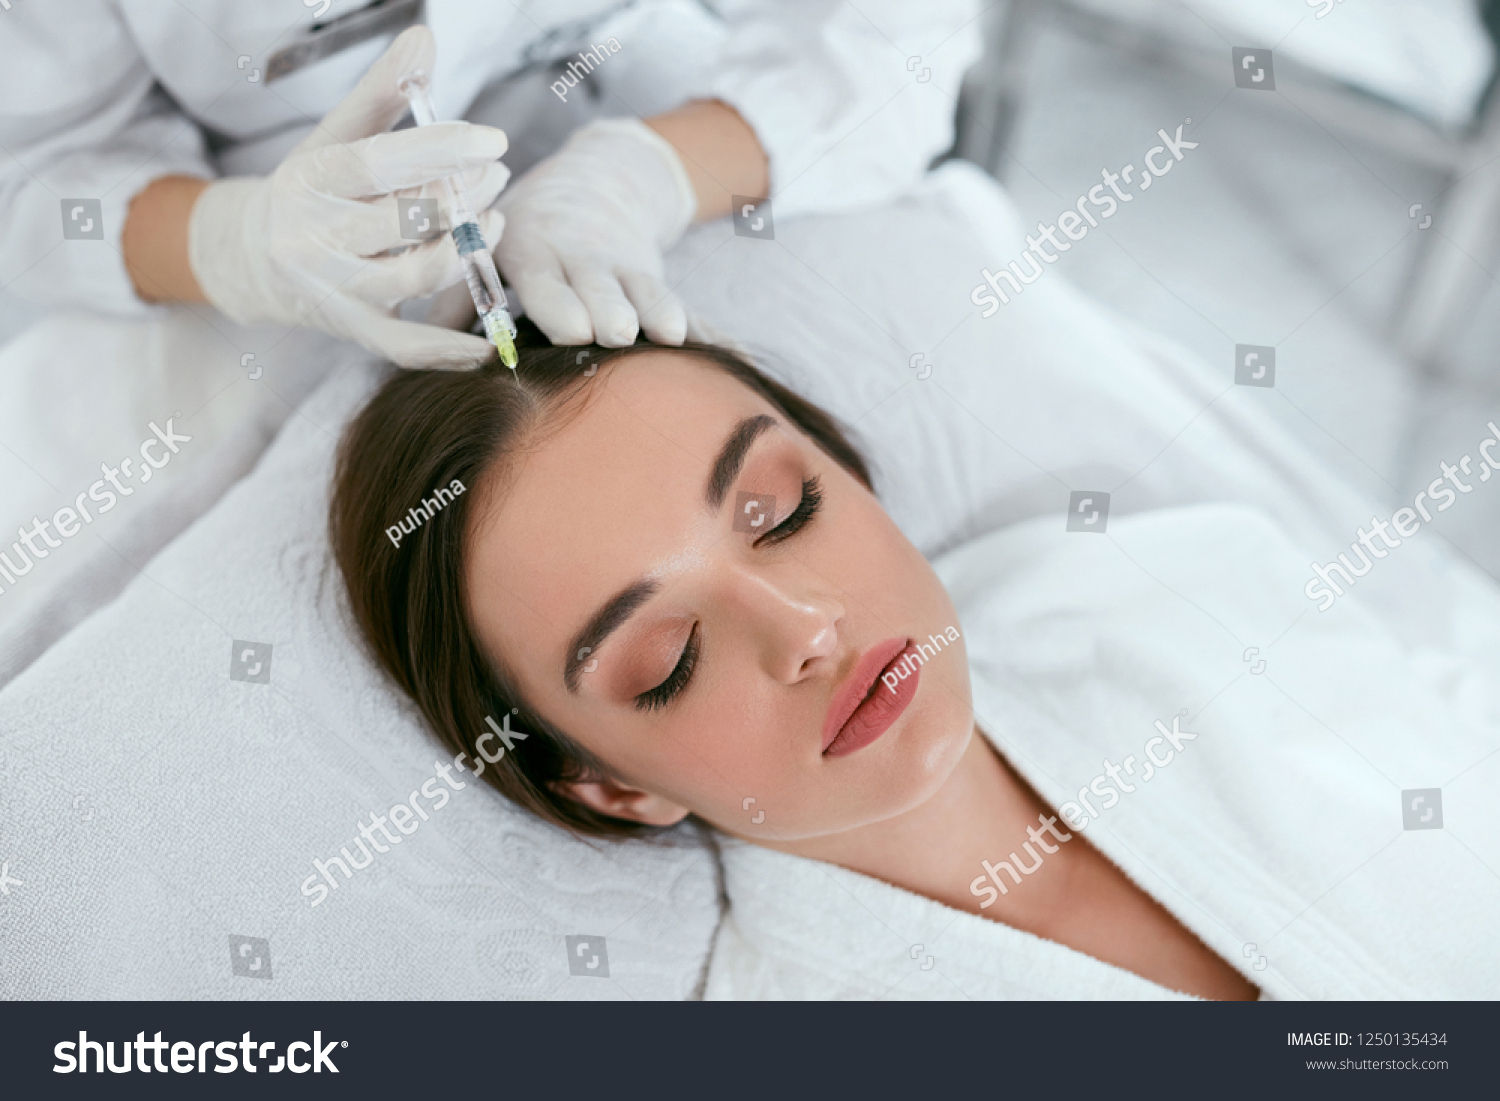 Mesotherapy For Hair Growth. Woman Receiving Injection In Head #1250135434